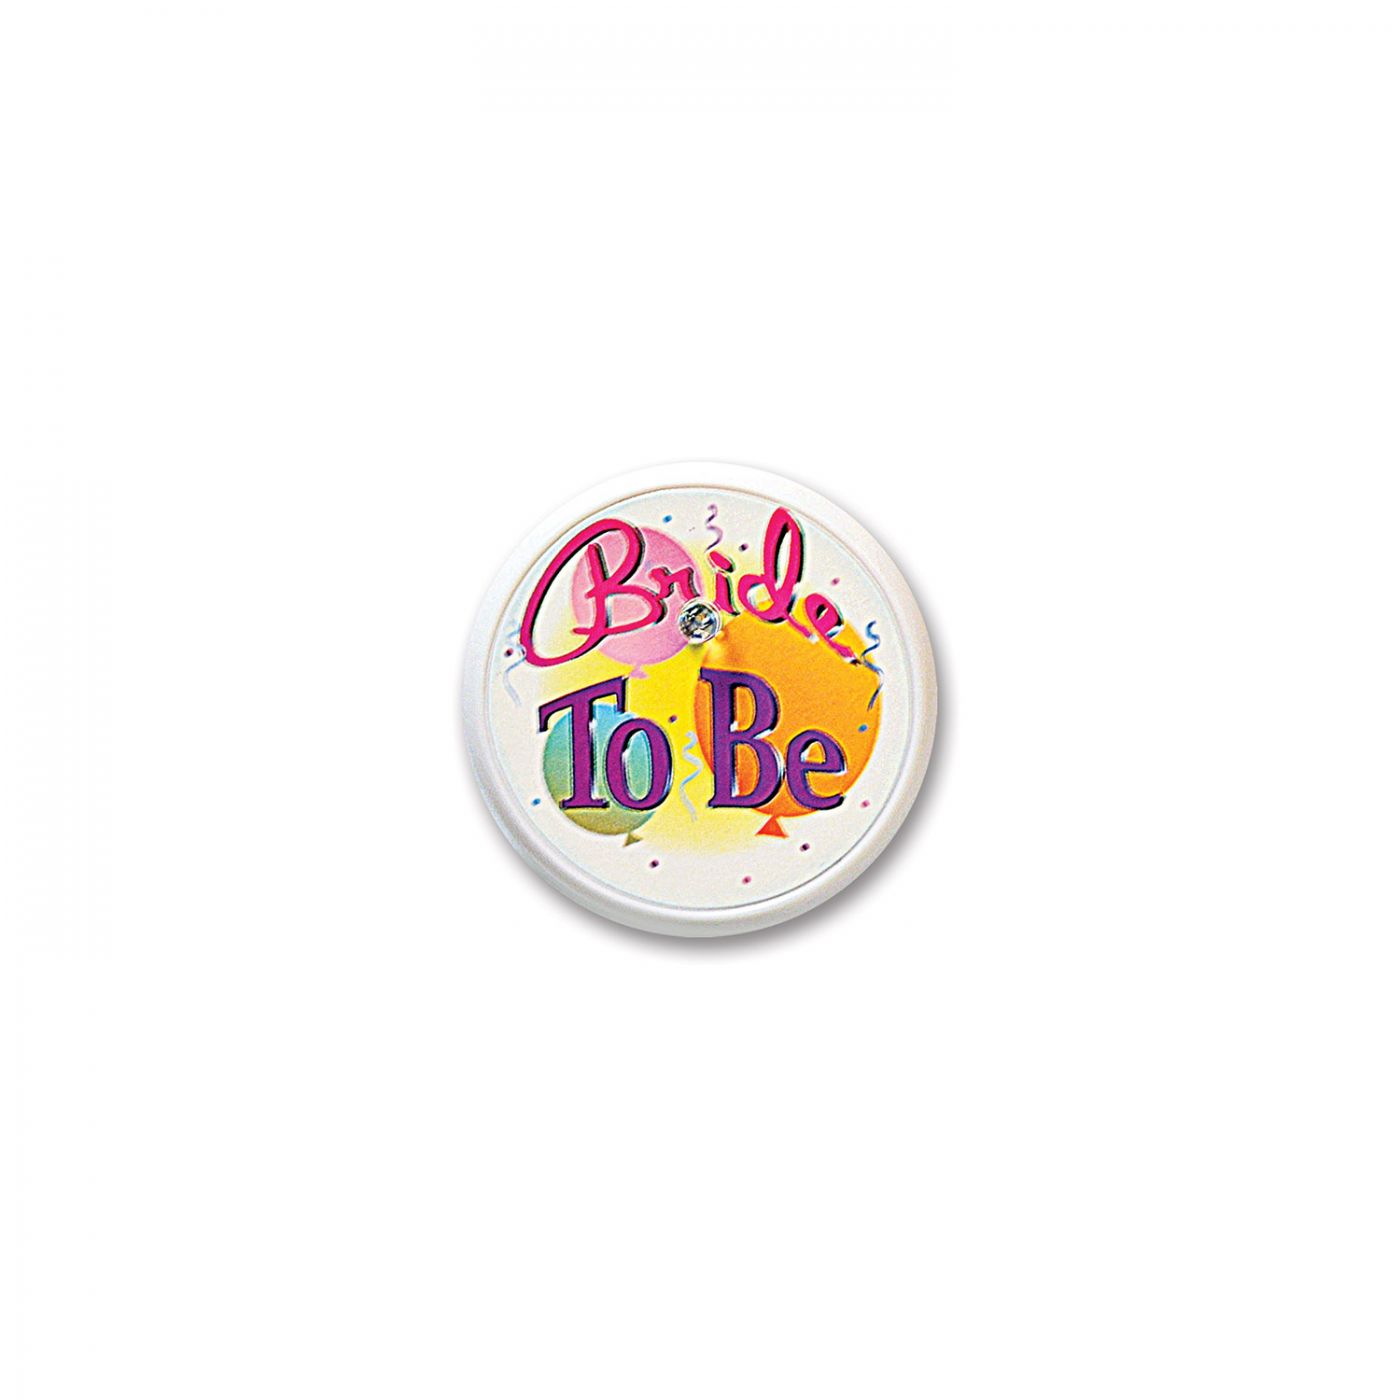 Bride To Be Blinking Button (6) image